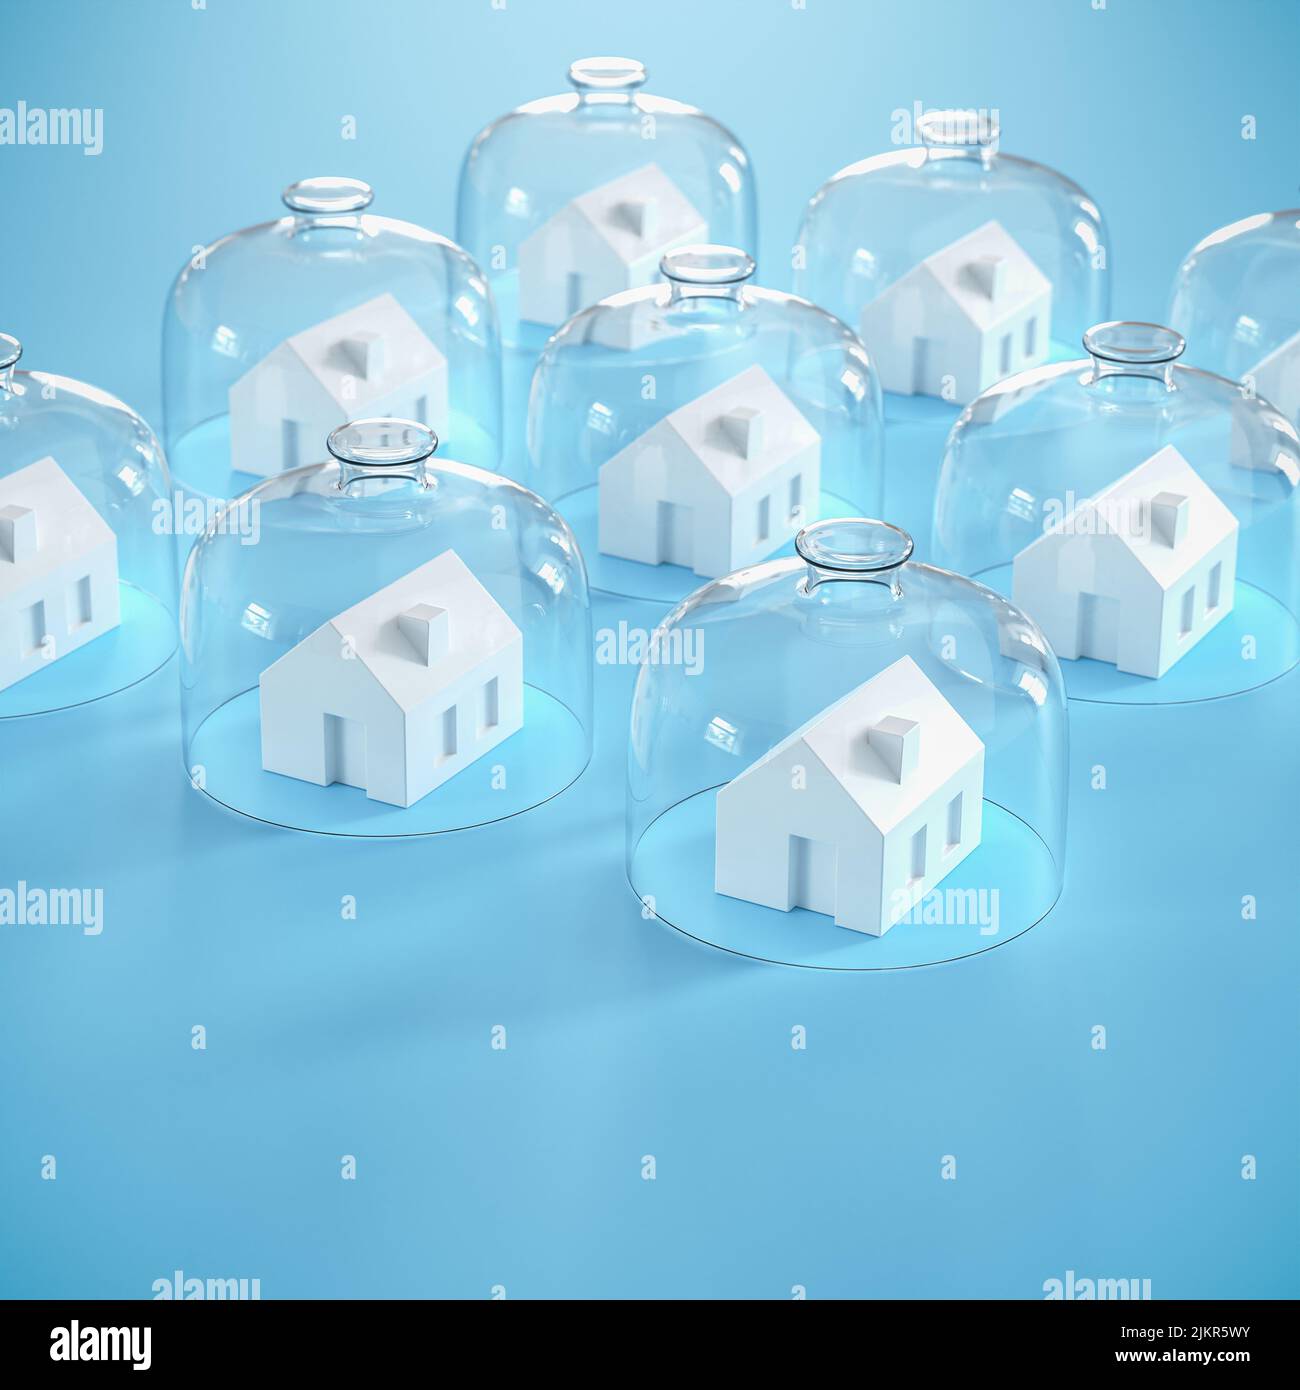 Proptecting your property concept - insurance, surveillance. Several model houses with glass domes. Stock Photo